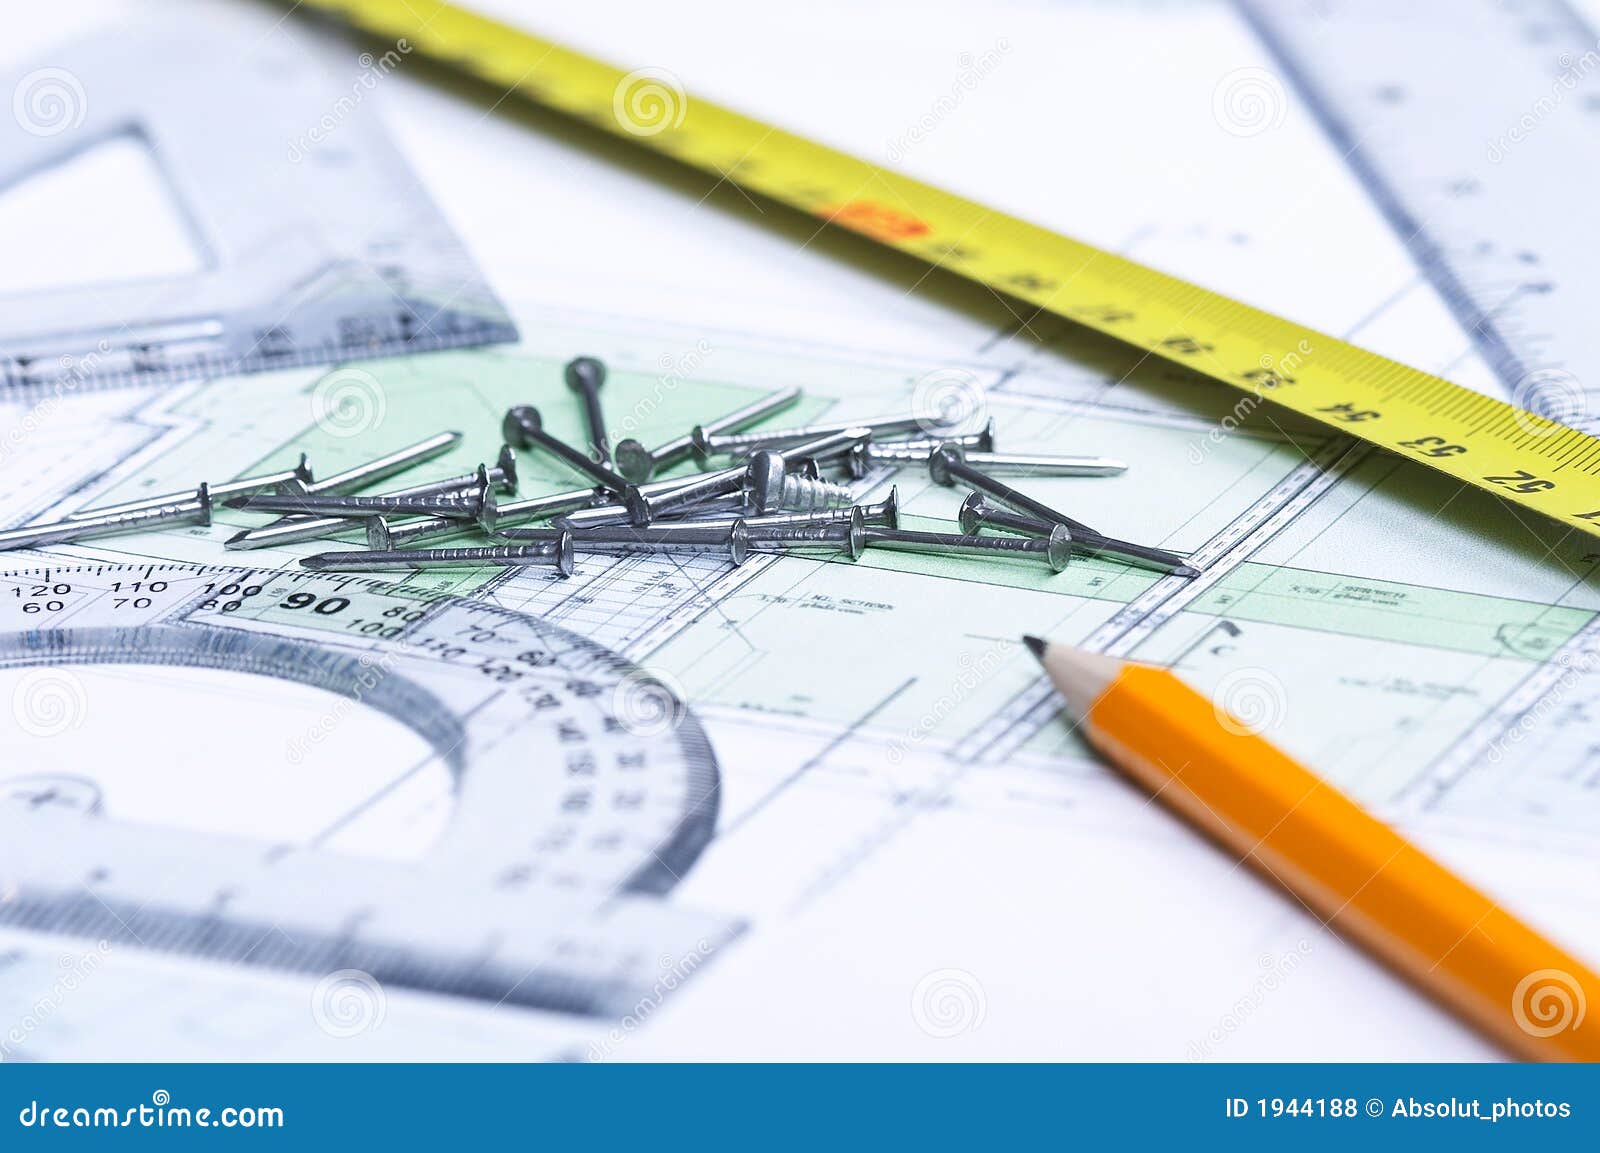 Floor Plan And Tools Royalty Free Stock Photos Image